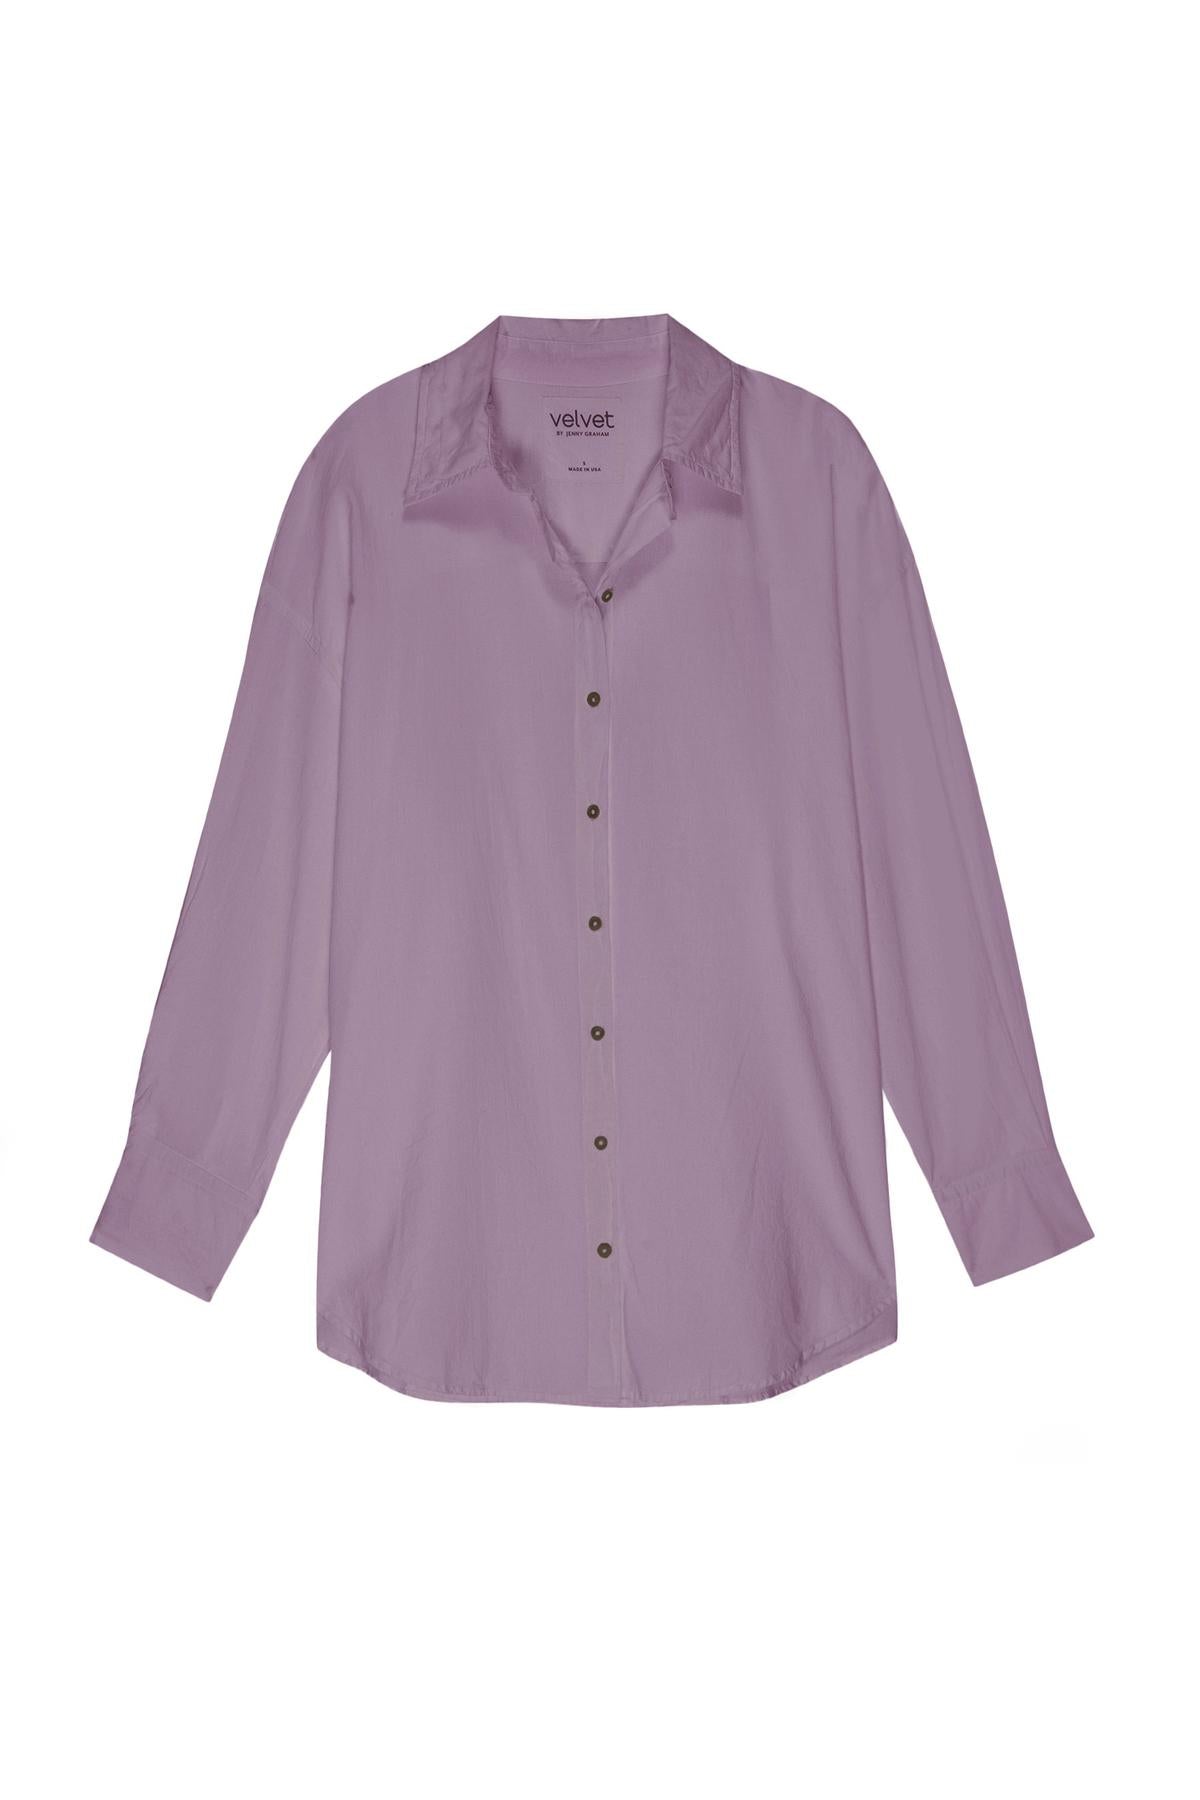   An oversized women's Velvet by Jenny Graham REDONDO BUTTON-UP SHIRT with a borrowed-from-the-boys silhouette and buttons down the front. 